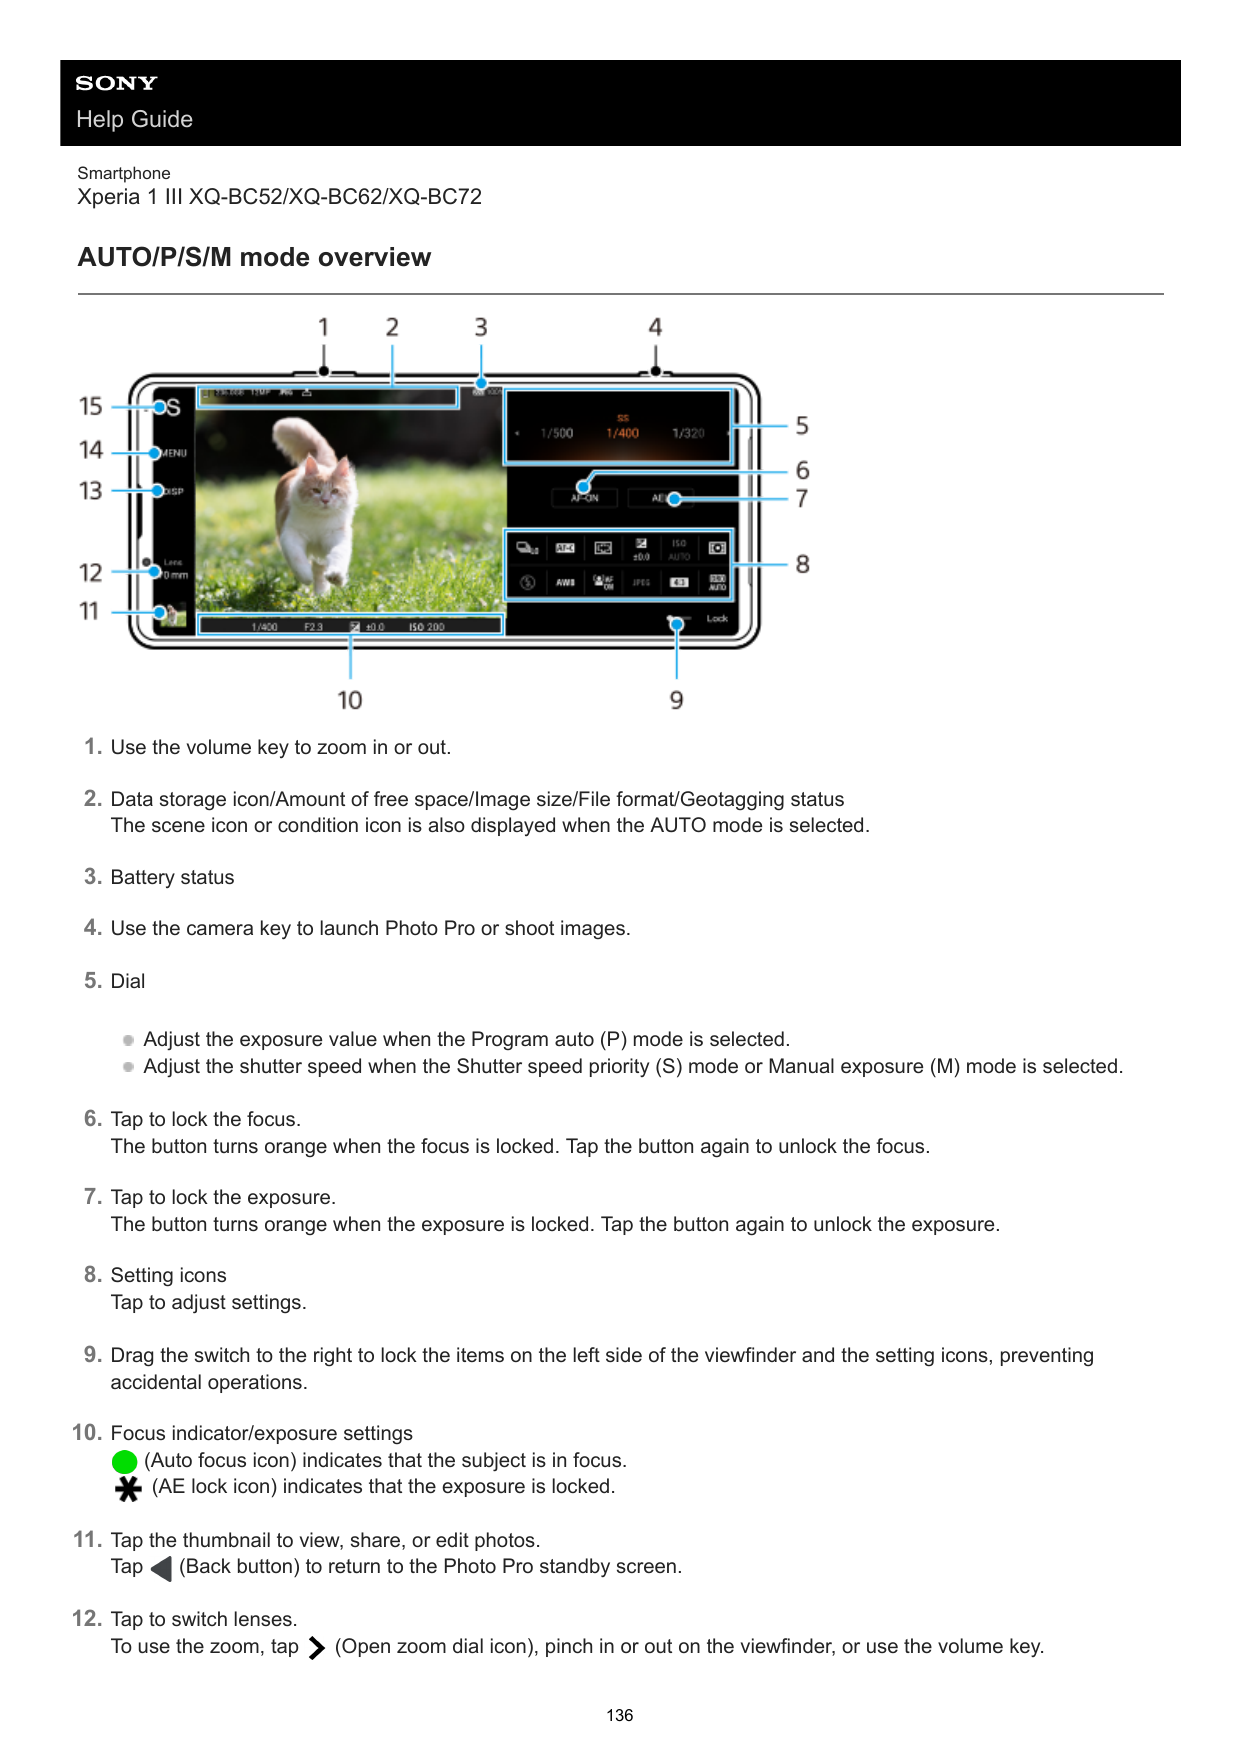 Help GuideSmartphoneXperia 1 III XQ-BC52/XQ-BC62/XQ-BC72AUTO/P/S/M mode overview1. Use the volume key to zoom in or out.2. Data 